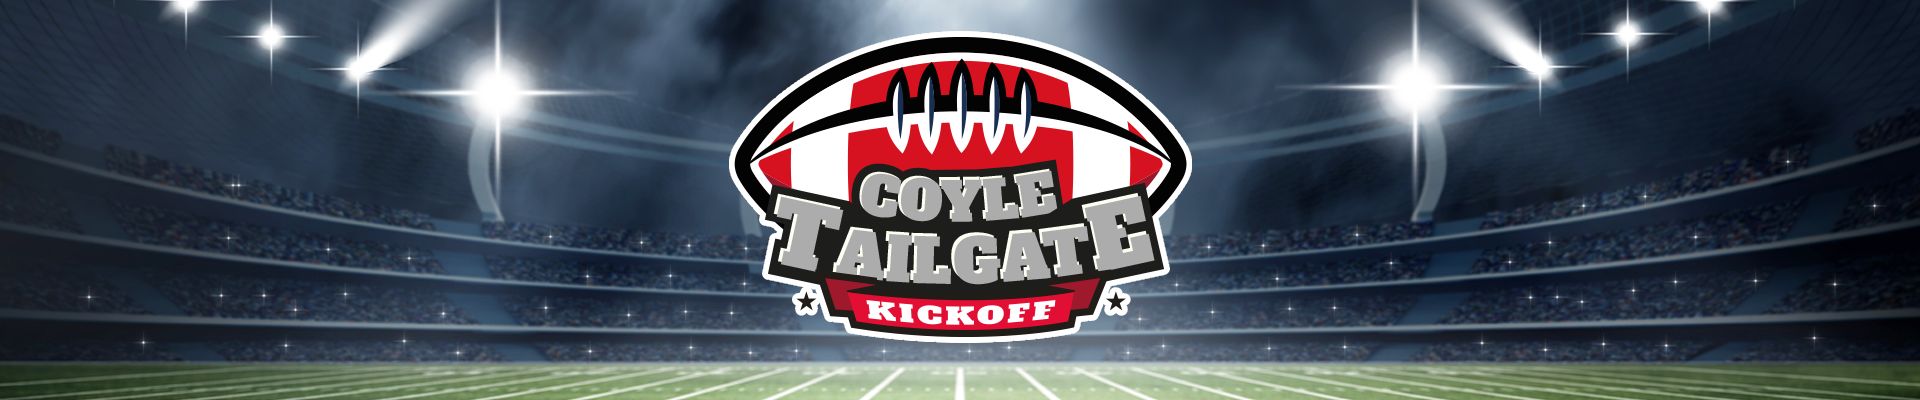 Coyle Tailgate Kickoff Sales Event